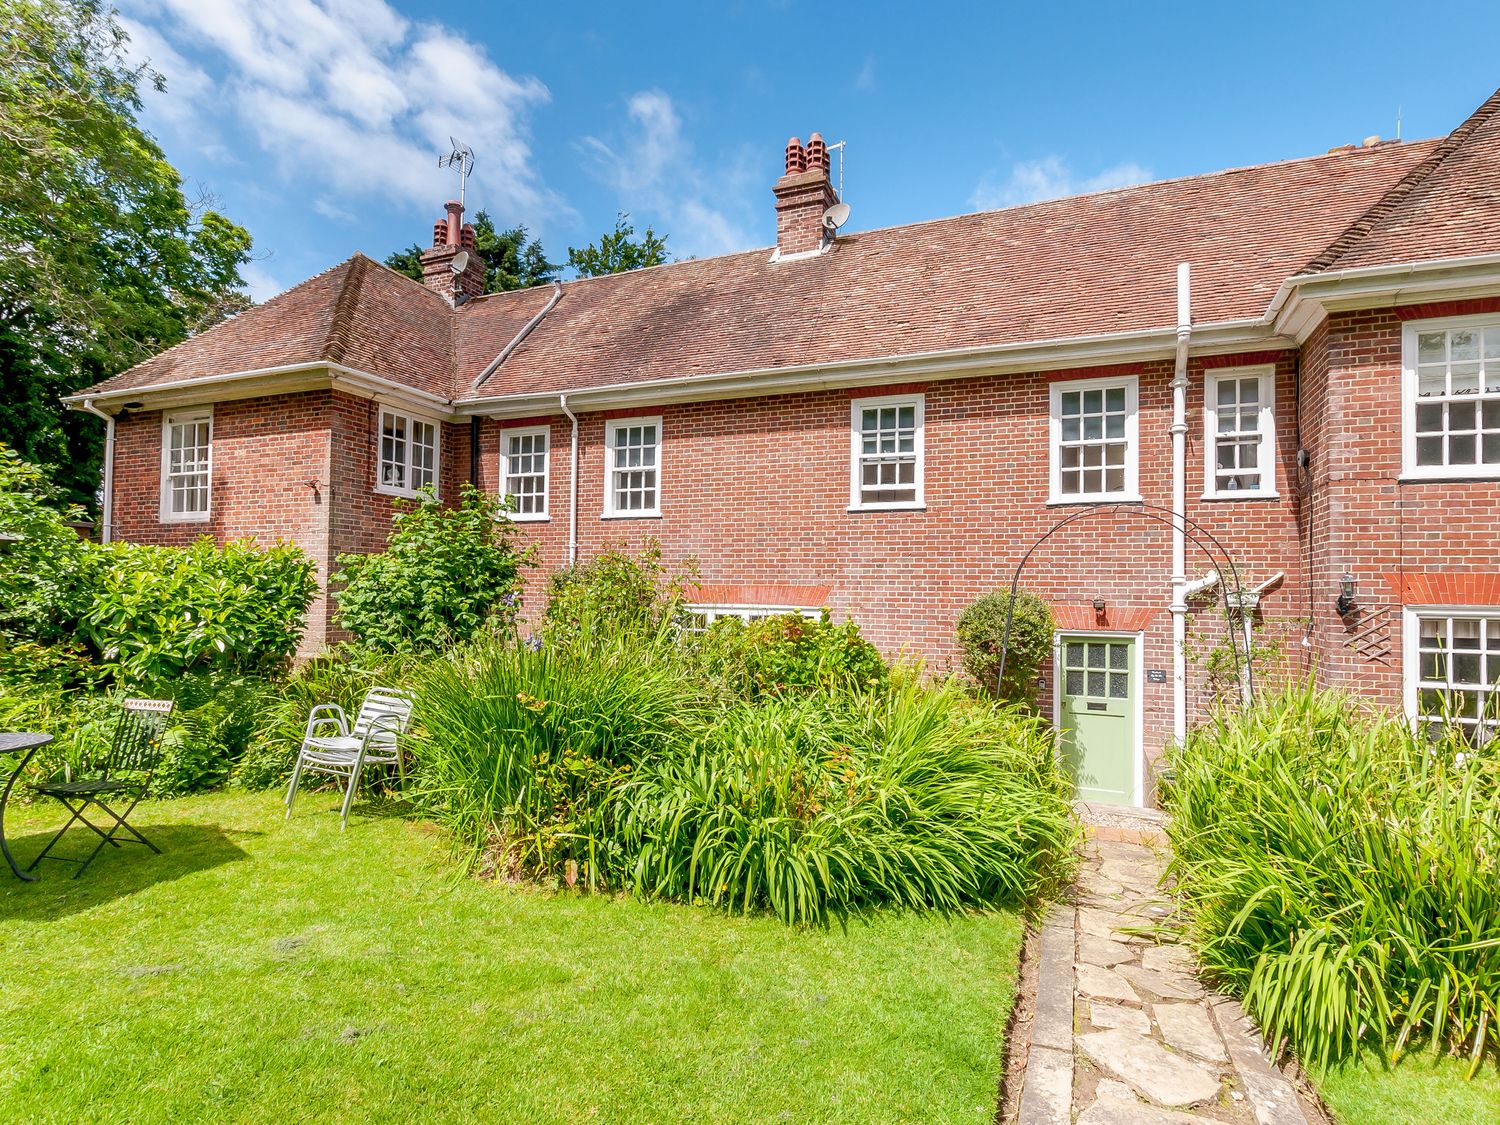 Woodlands By The Sea Cottage - Kent & Sussex - 1052742 - photo 1